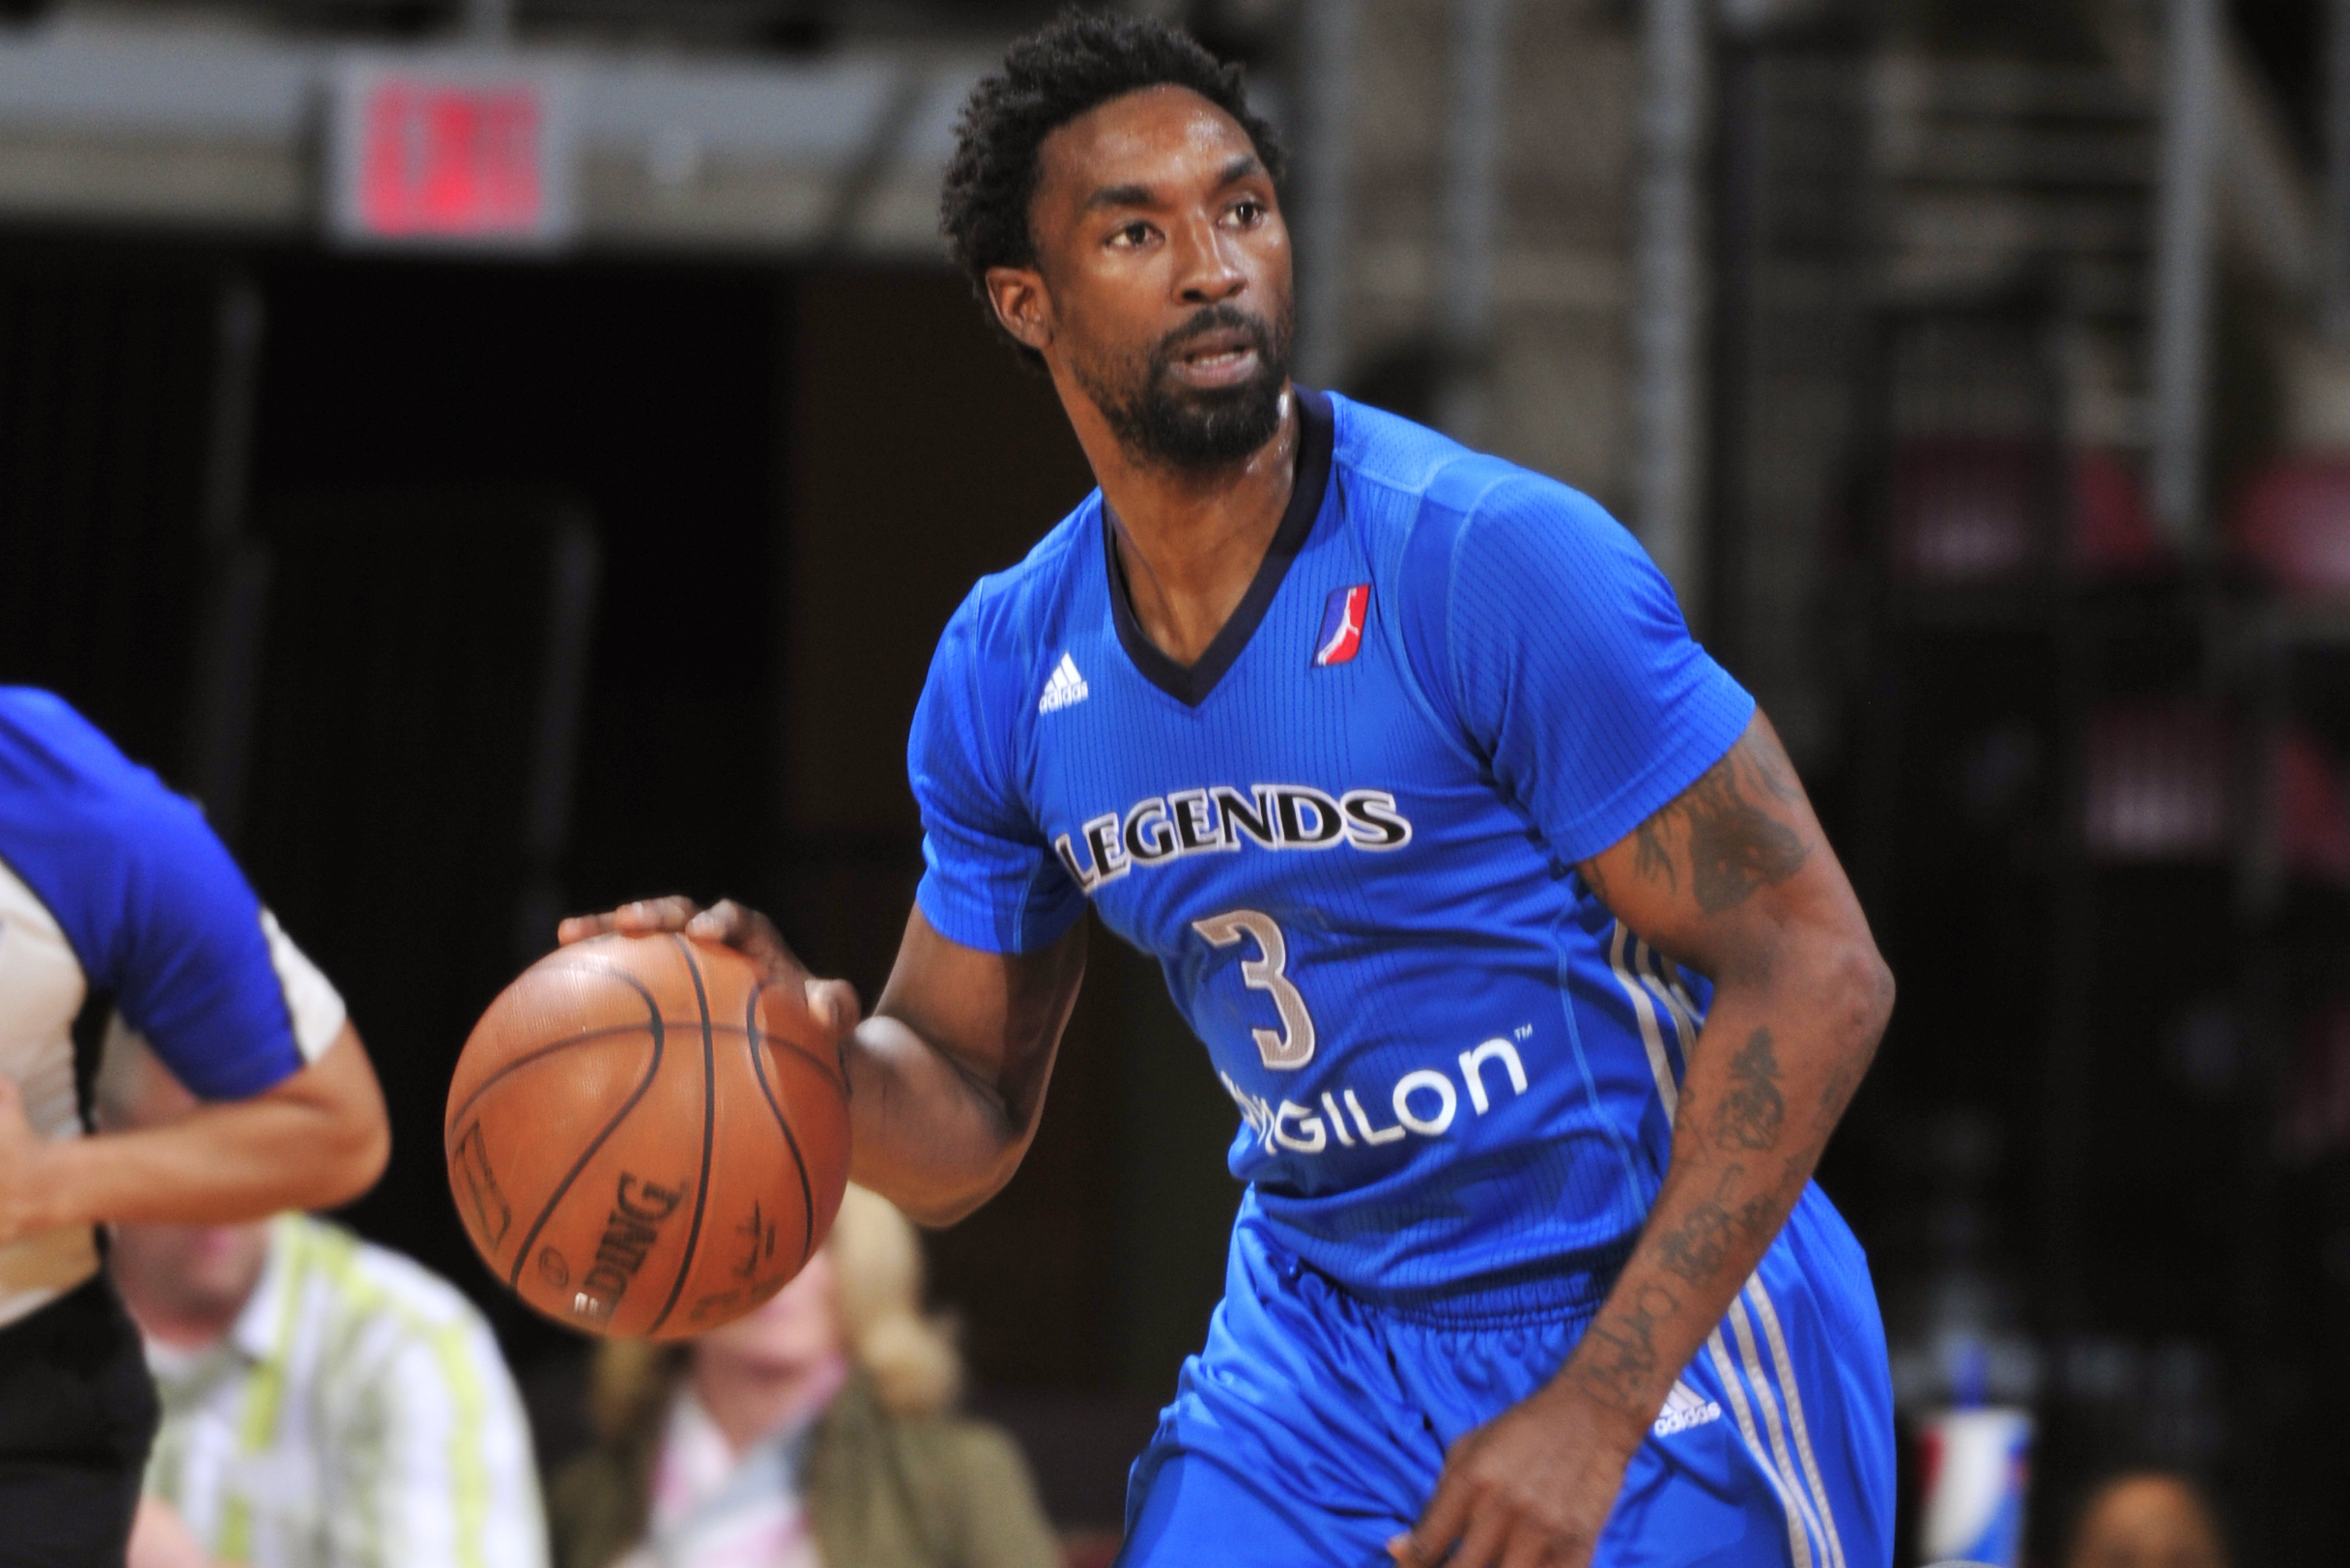 Who Is Ben Gordon? Know About His Net worth & Basketball Career!